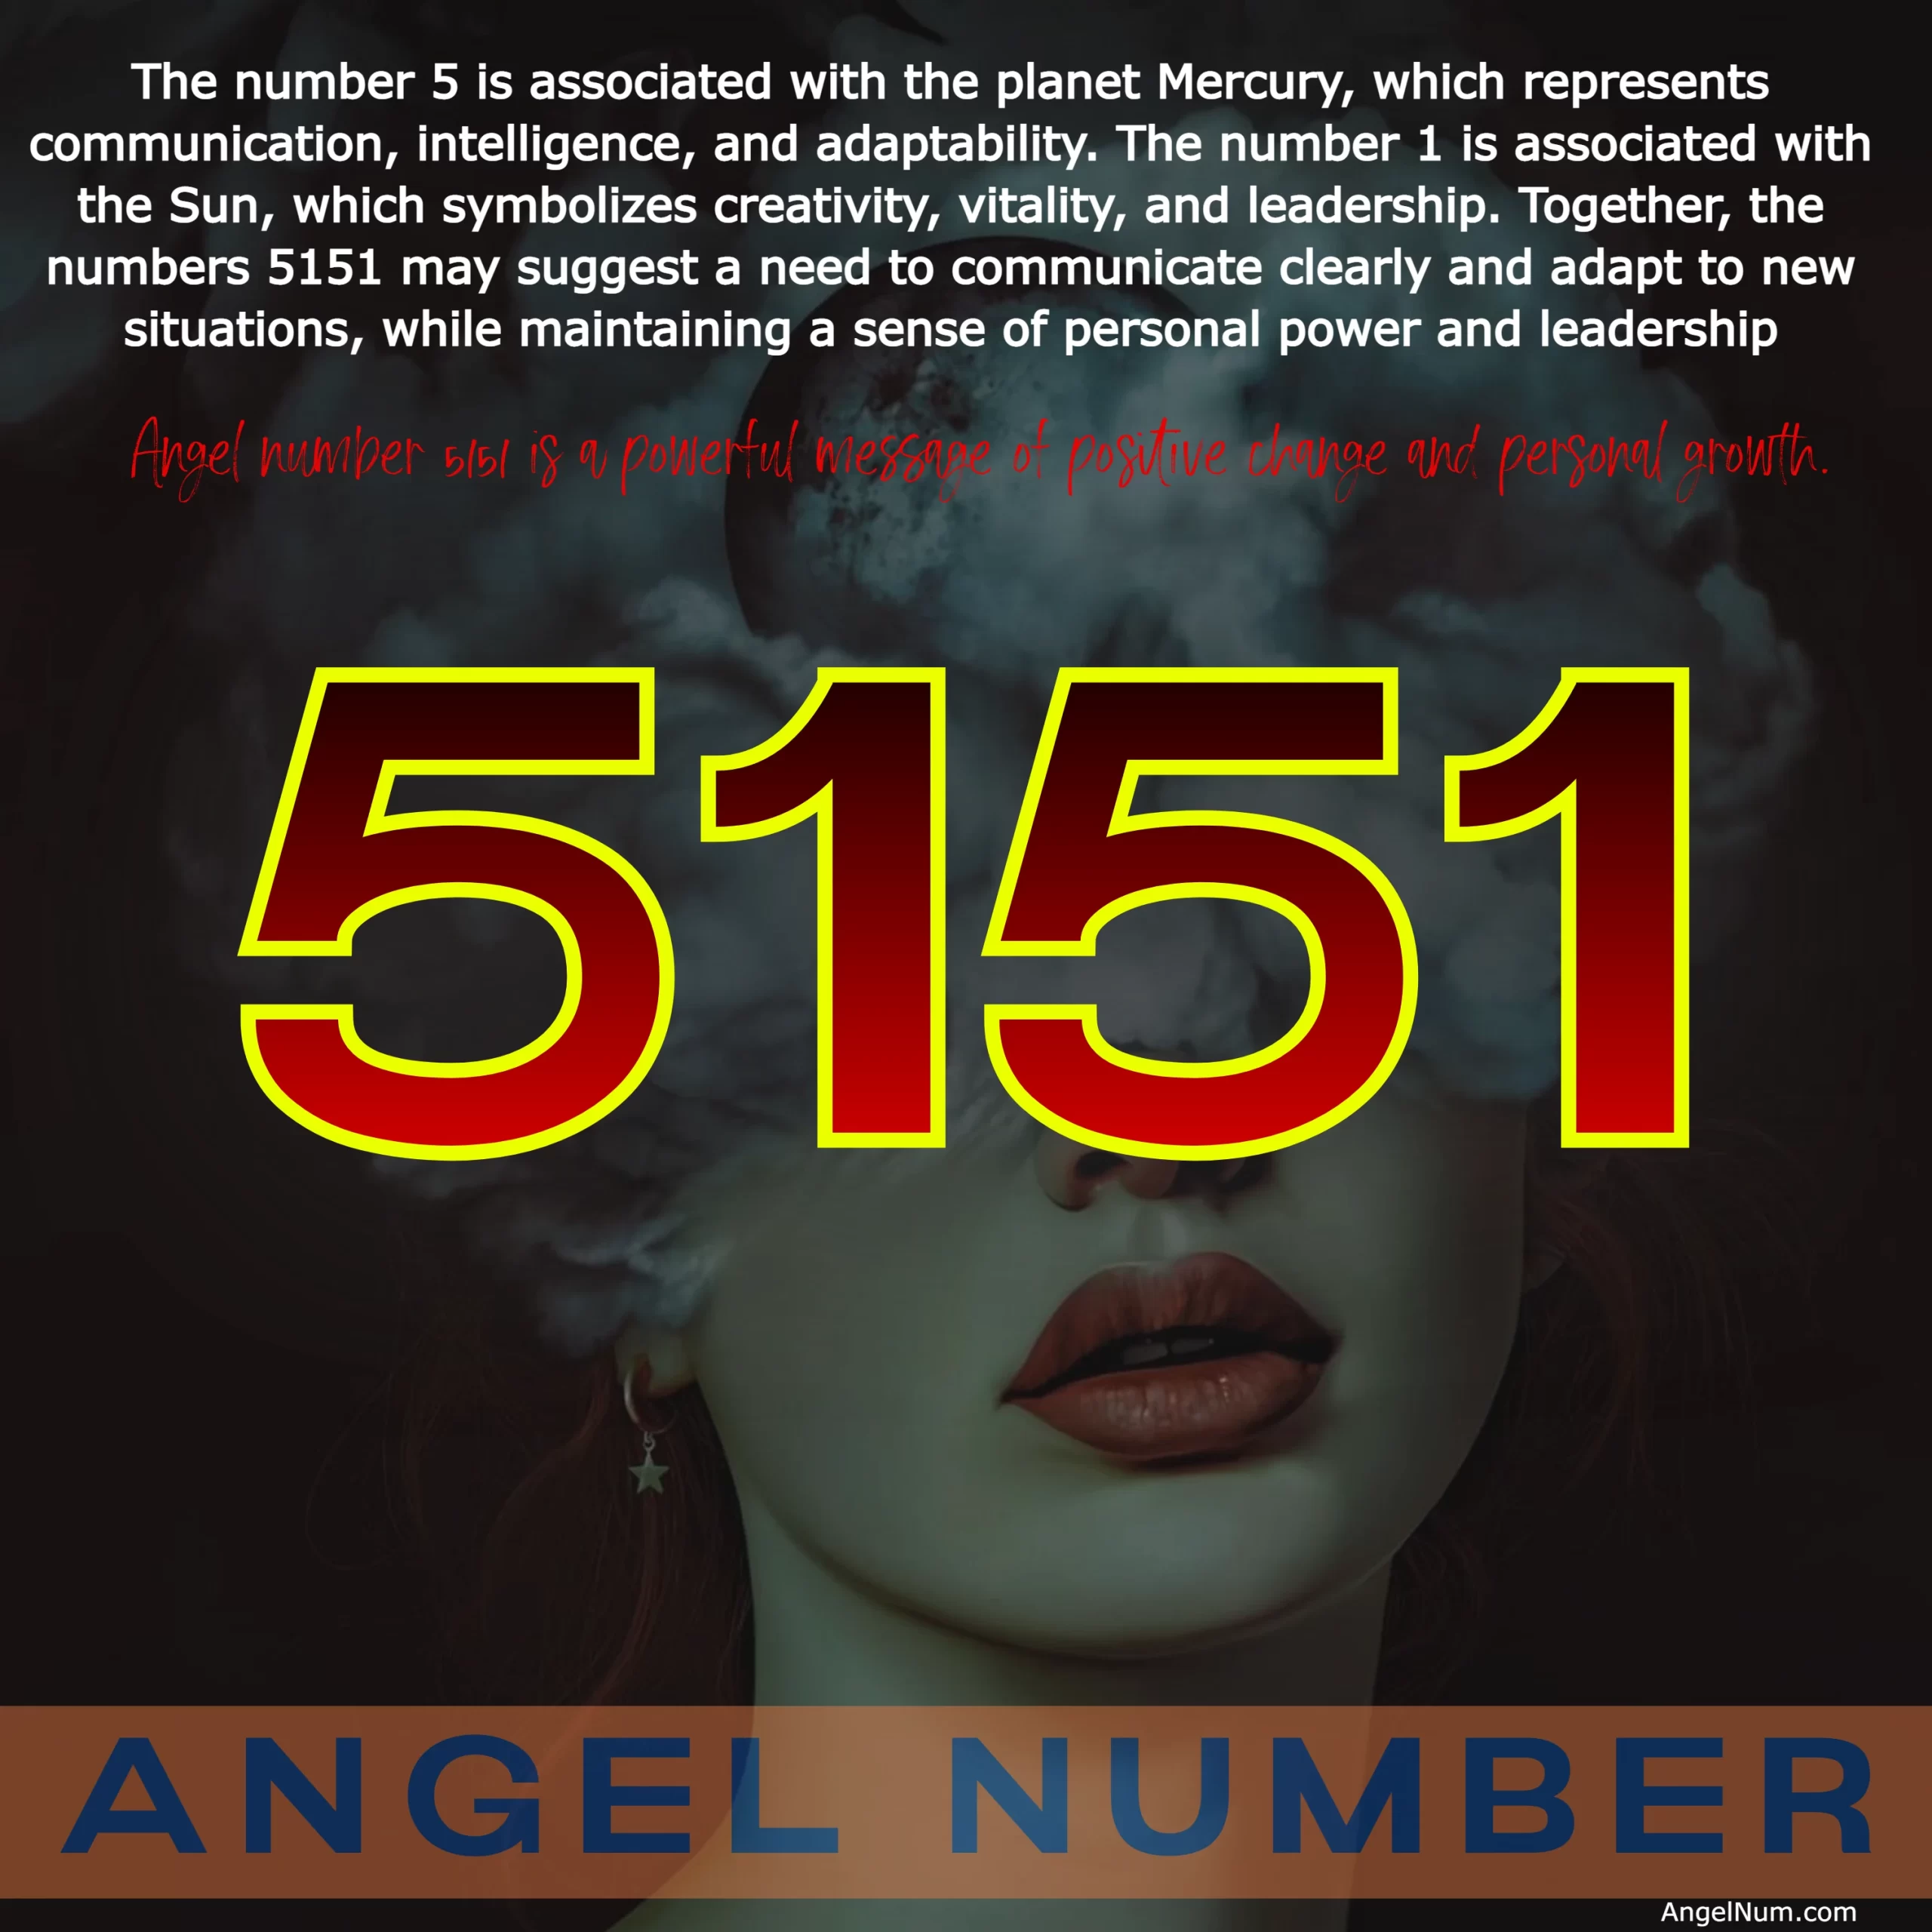 Angel Number 5151: Meaning, Symbolism, and Significance